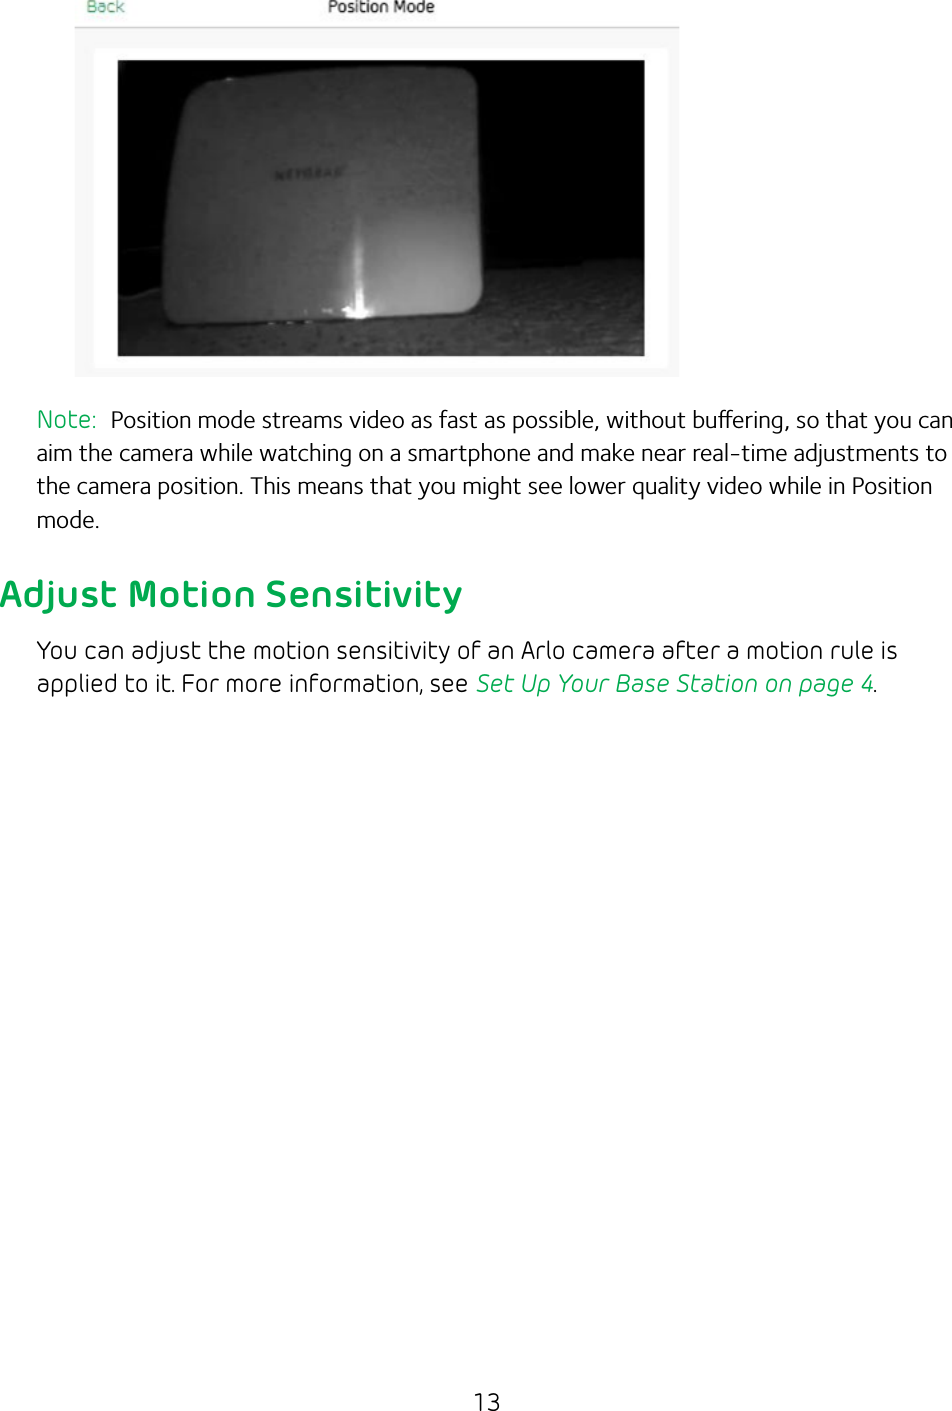 13Note:  Position mode streams video as fast as possible, without buering, so that you can aim the camera while watching on a smartphone and make near real-time adjustments to the camera position. This means that you might see lower quality video while in Position mode.Adjust Motion SensitivityYou can adjust the motion sensitivity of an Arlo camera after a motion rule is applied to it. For more information, see Set Up Your Base Station on page 4.